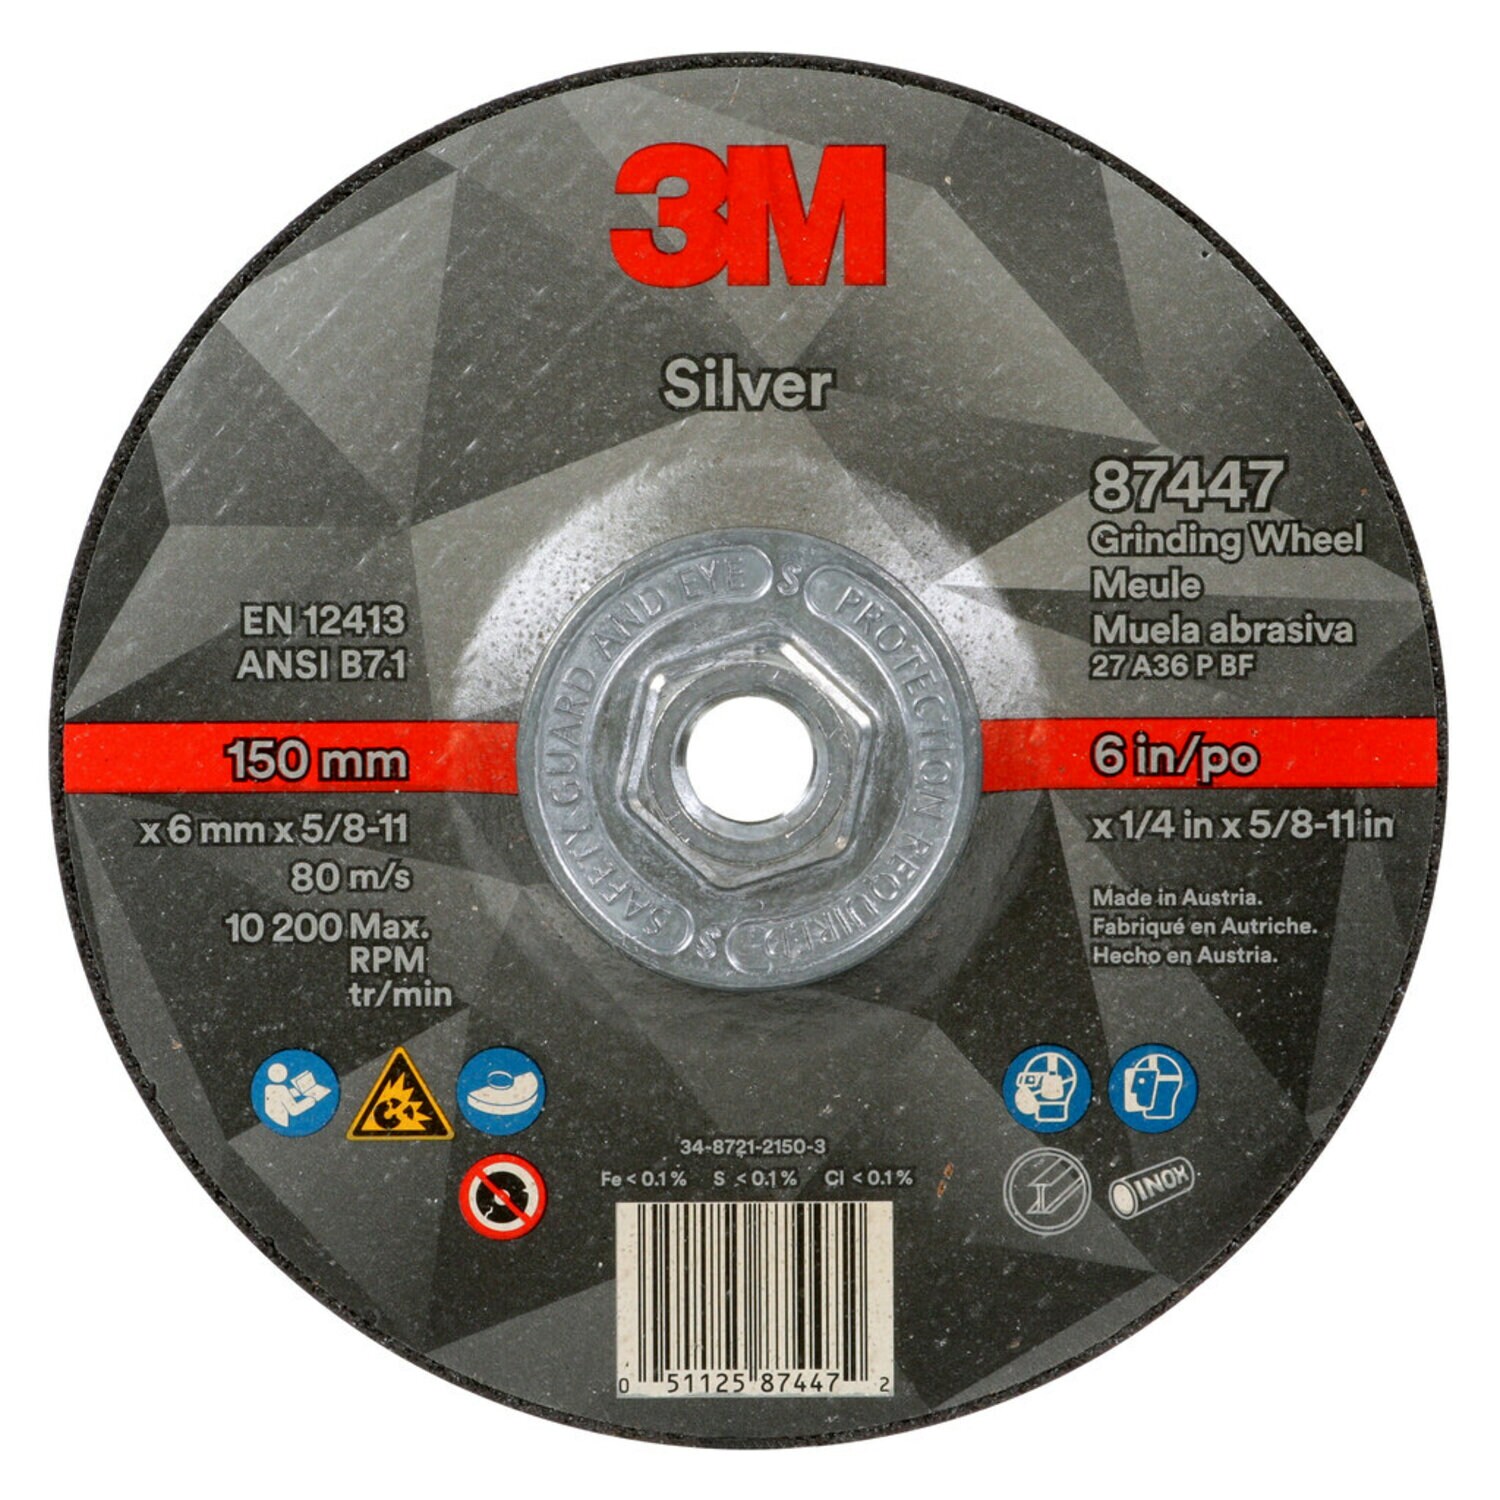 7100244821 - 3M Silver Depressed Center Grinding Wheel, 87447, Quick Change, Type
27, 6 x 1/4 x 5/8"-11 in, 10/Carton, 20 ea/Case